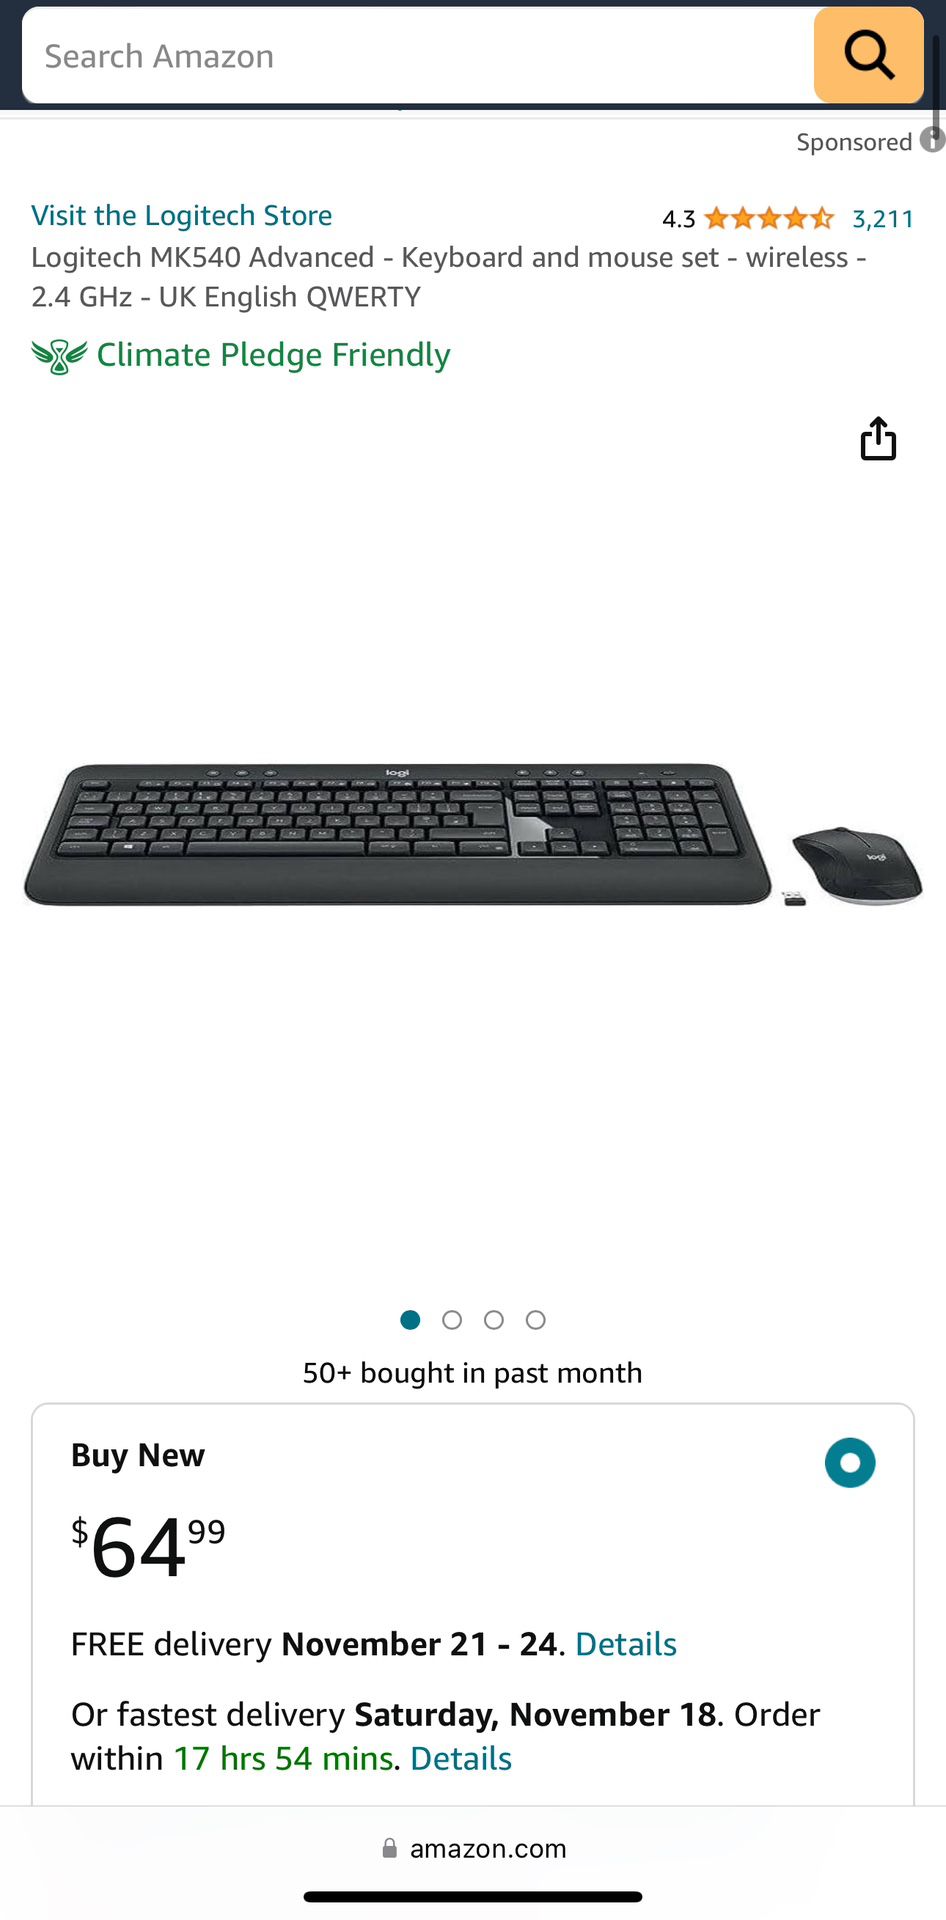 Wireless Keyboard And Mouse 